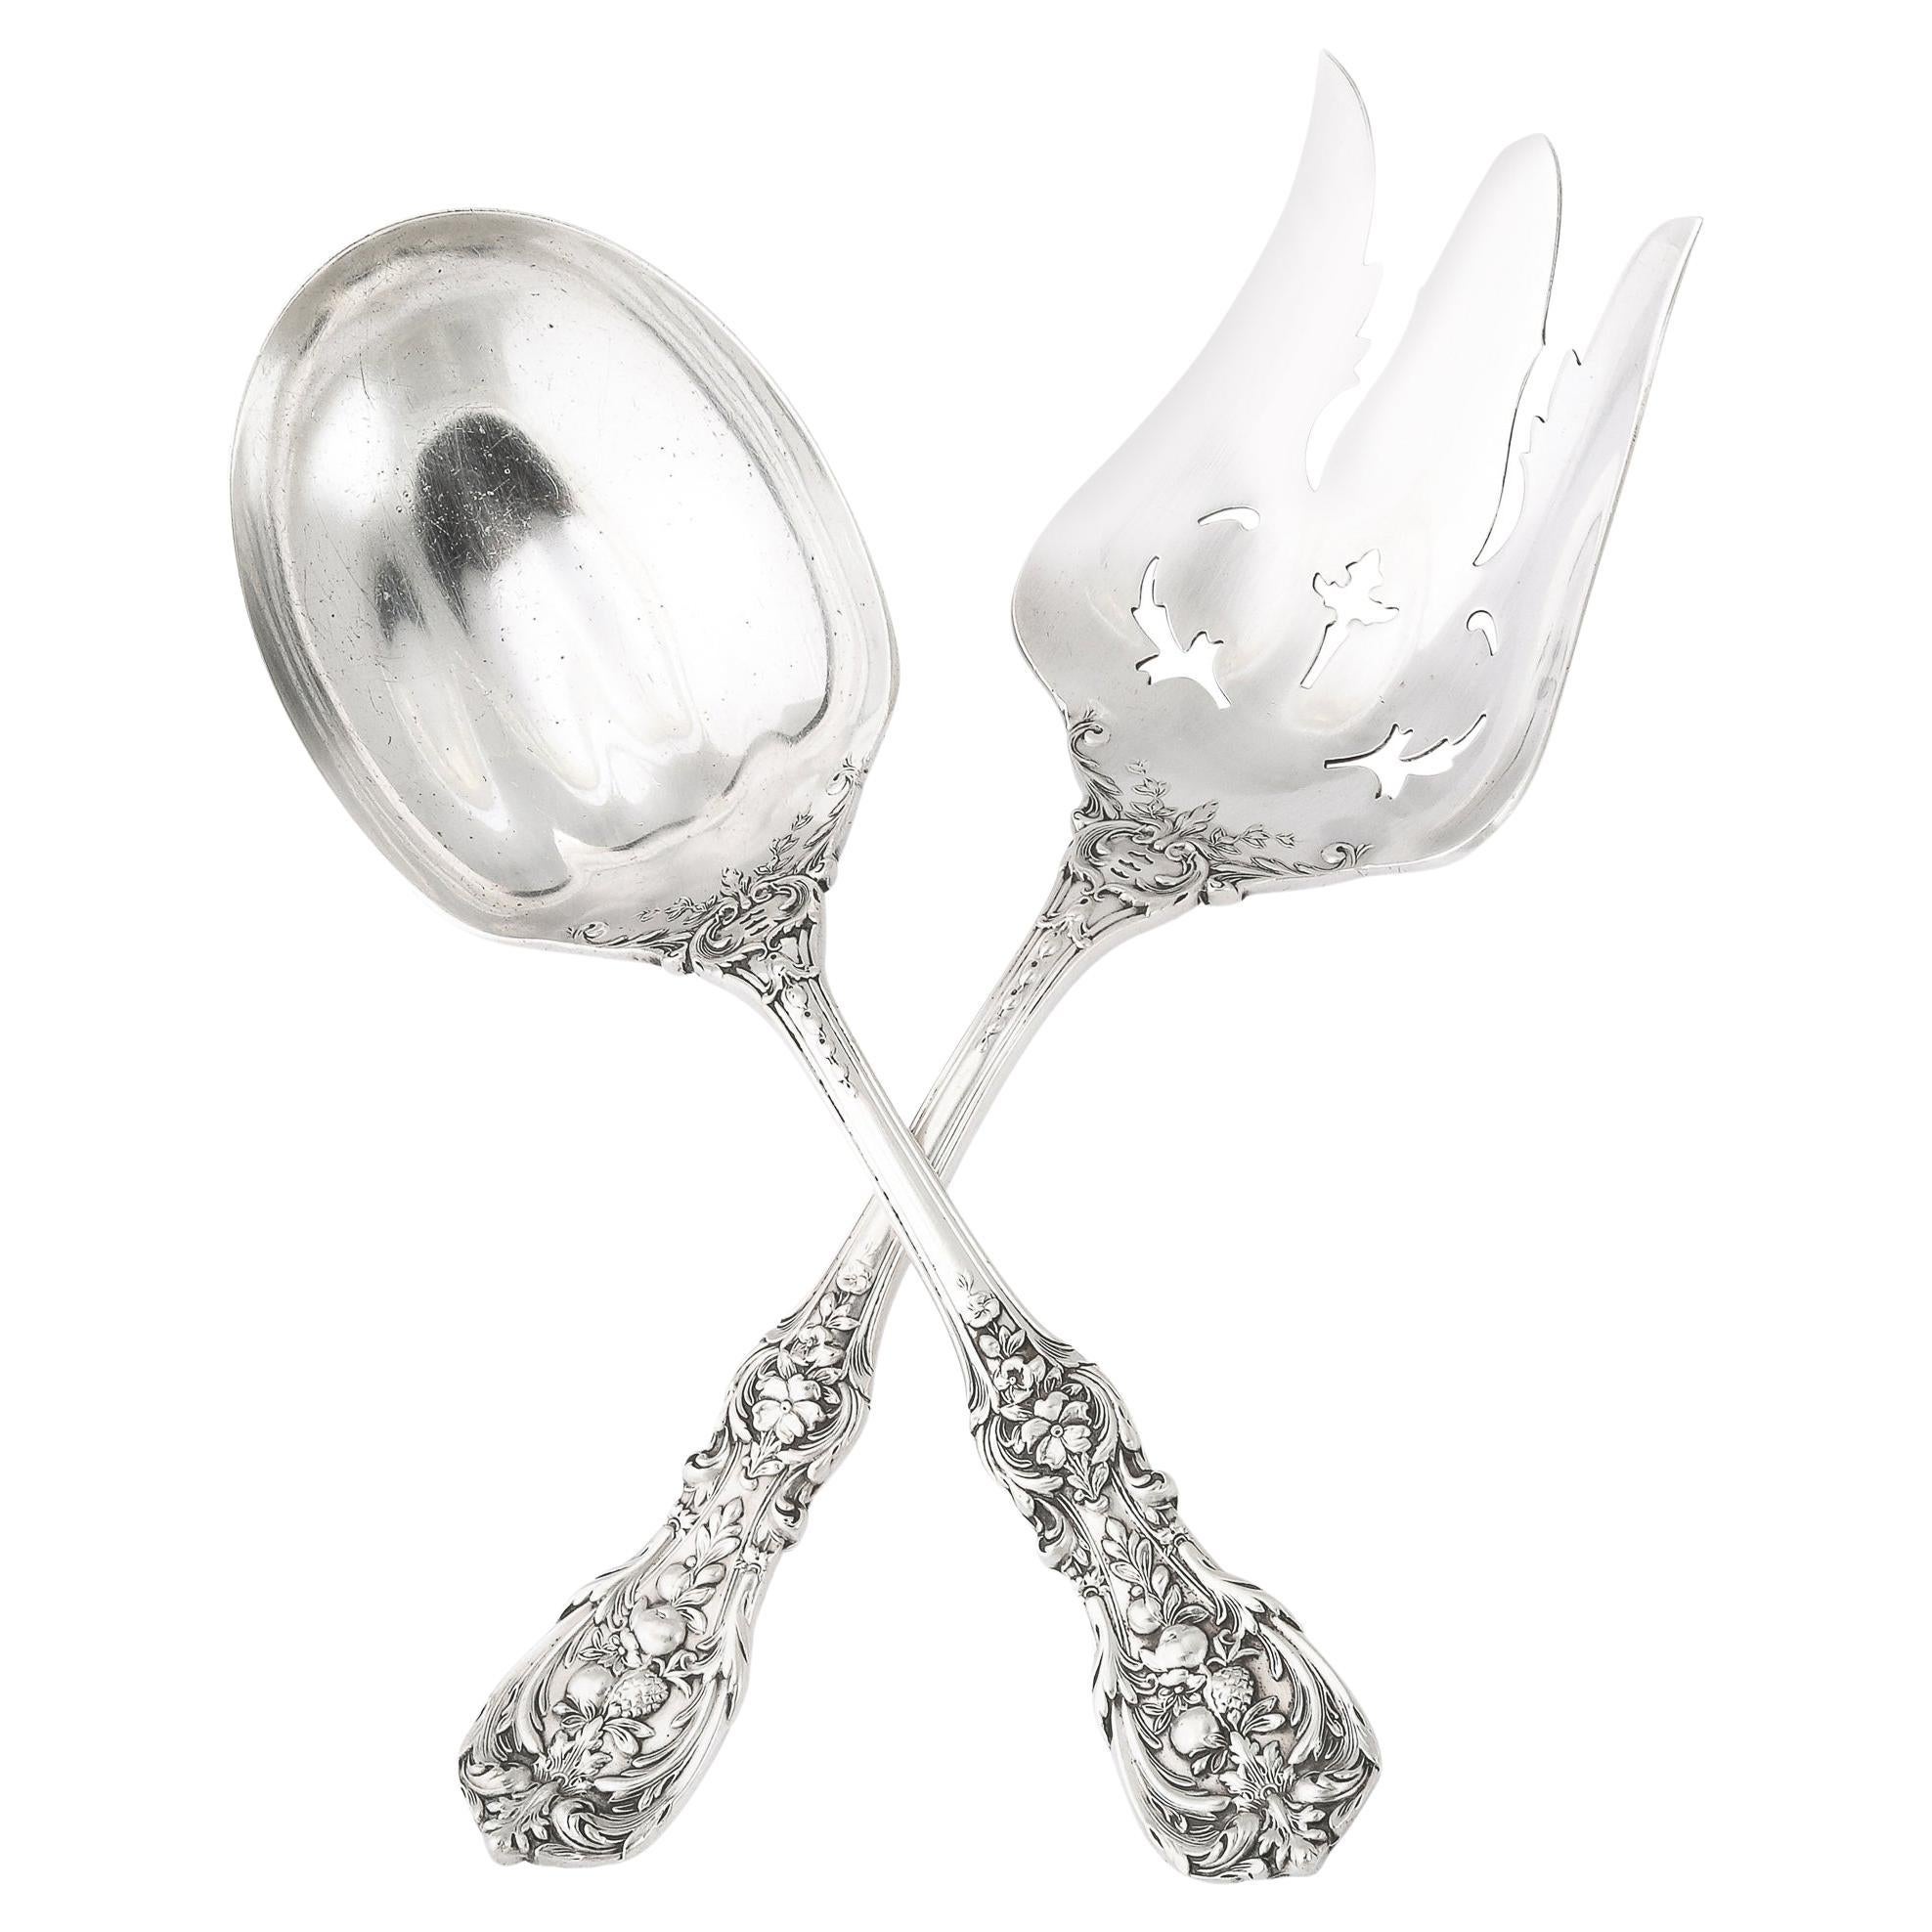 Reed and Barton Francis I Pattern Sterling Silver Serving Spoon & Fork Set 